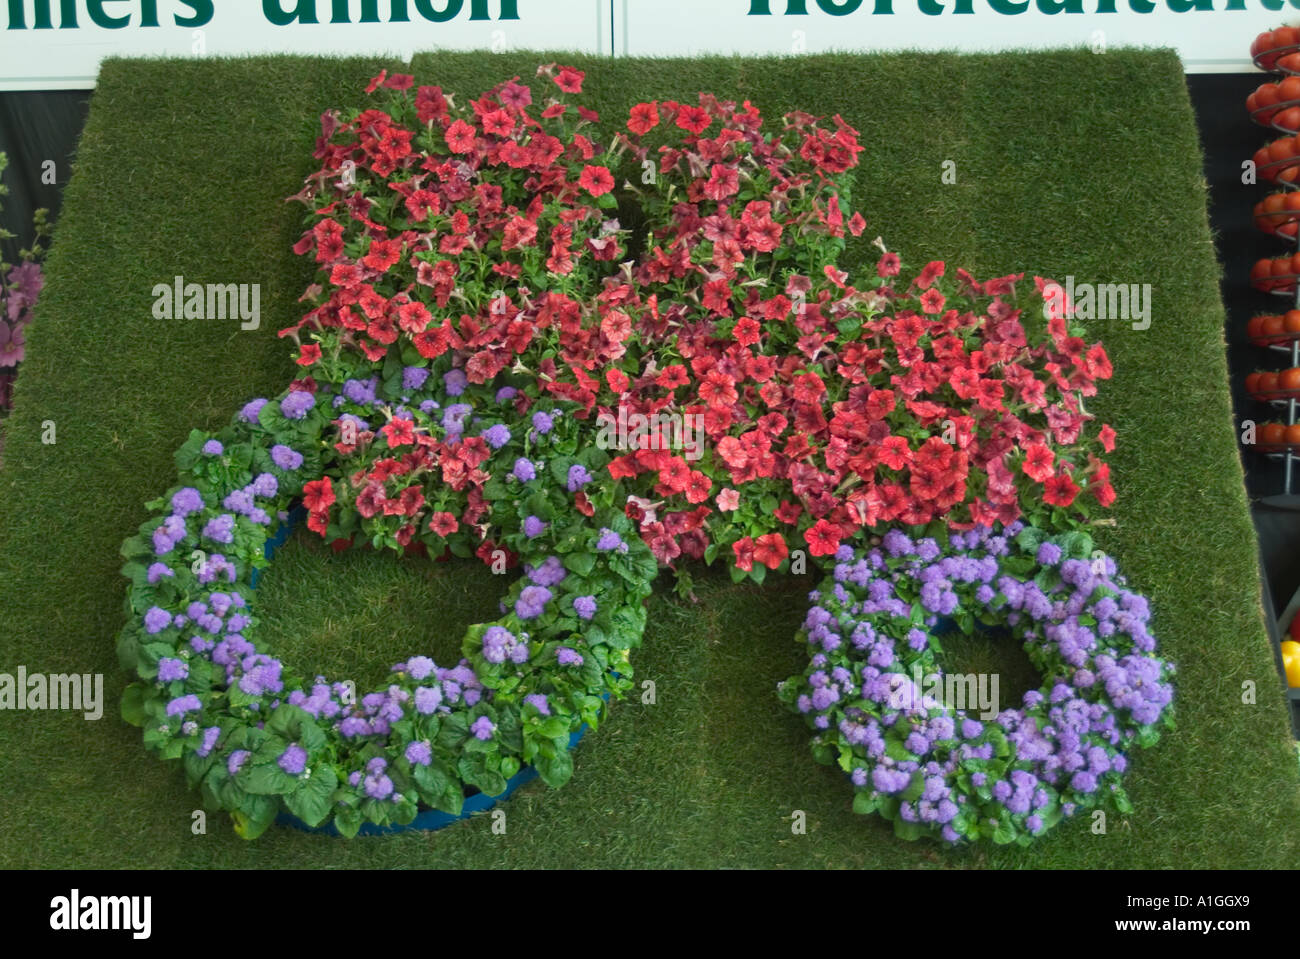 The Farmers Union Logo created in flowers at the Great Yorkshire Show Stock Photo